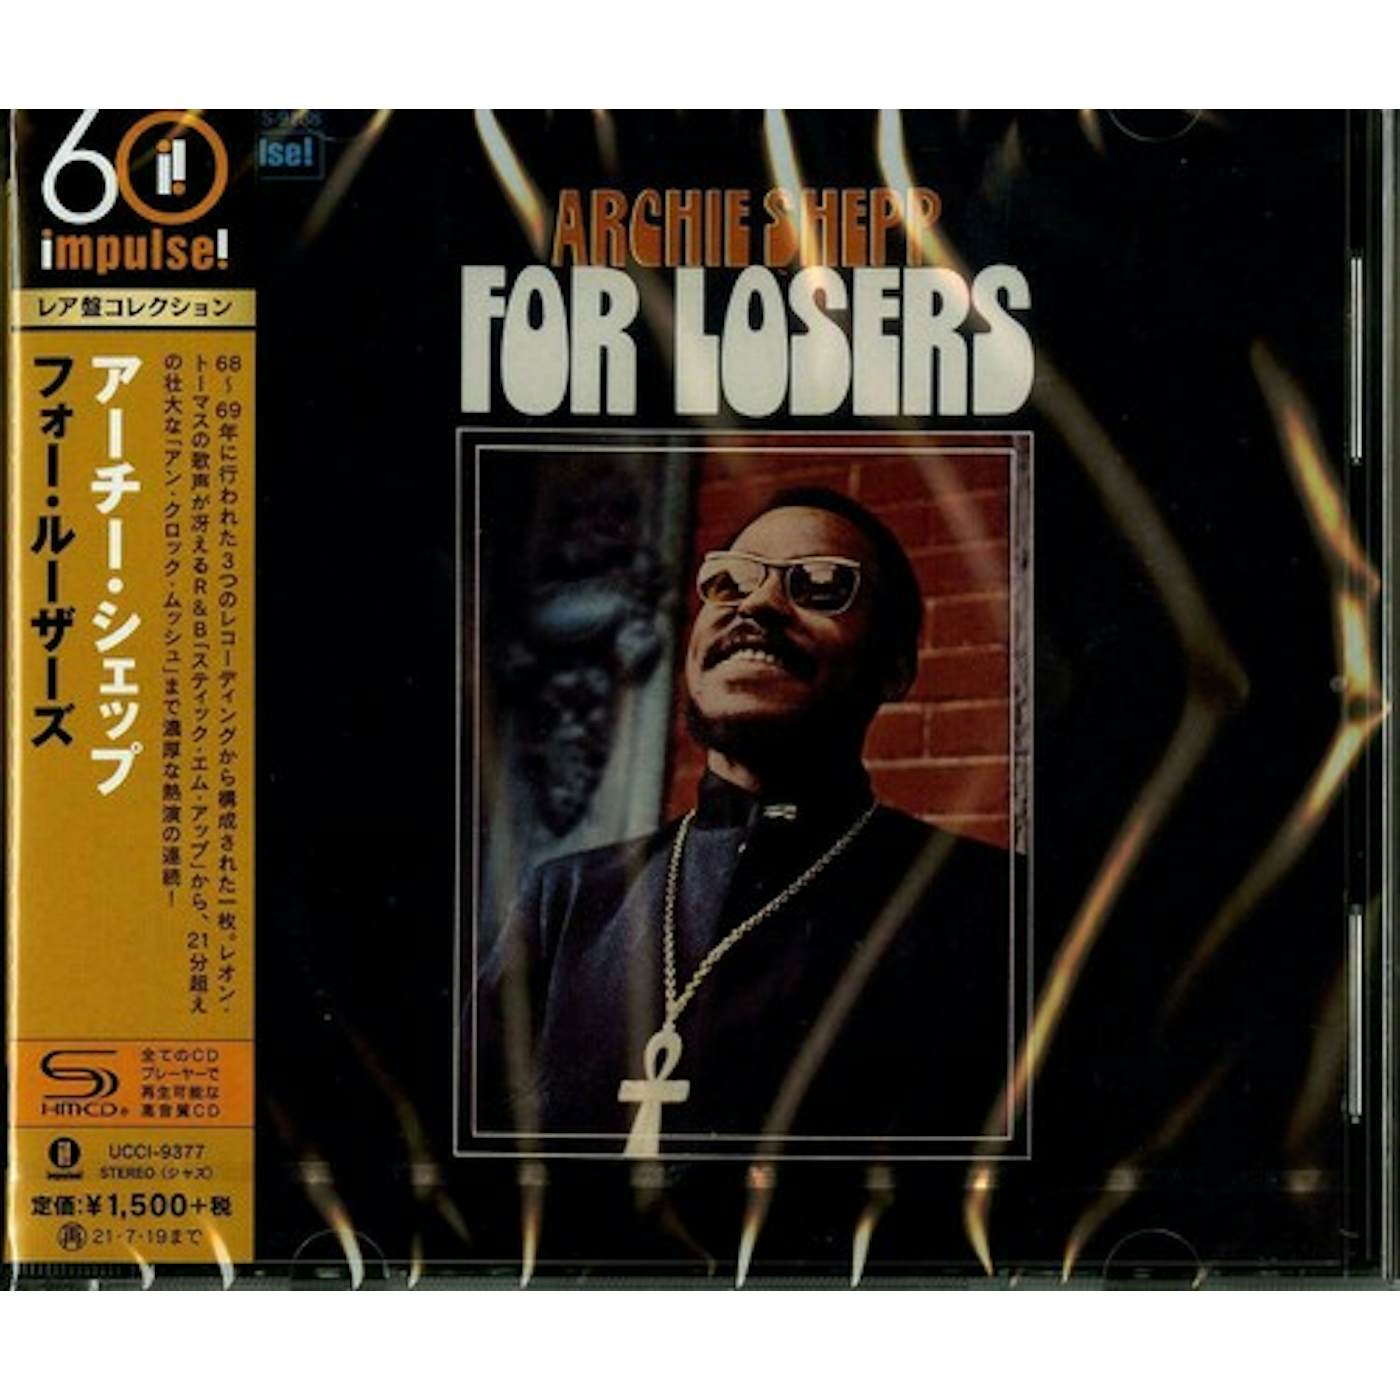 Archie Shepp FOR LOSERS CD